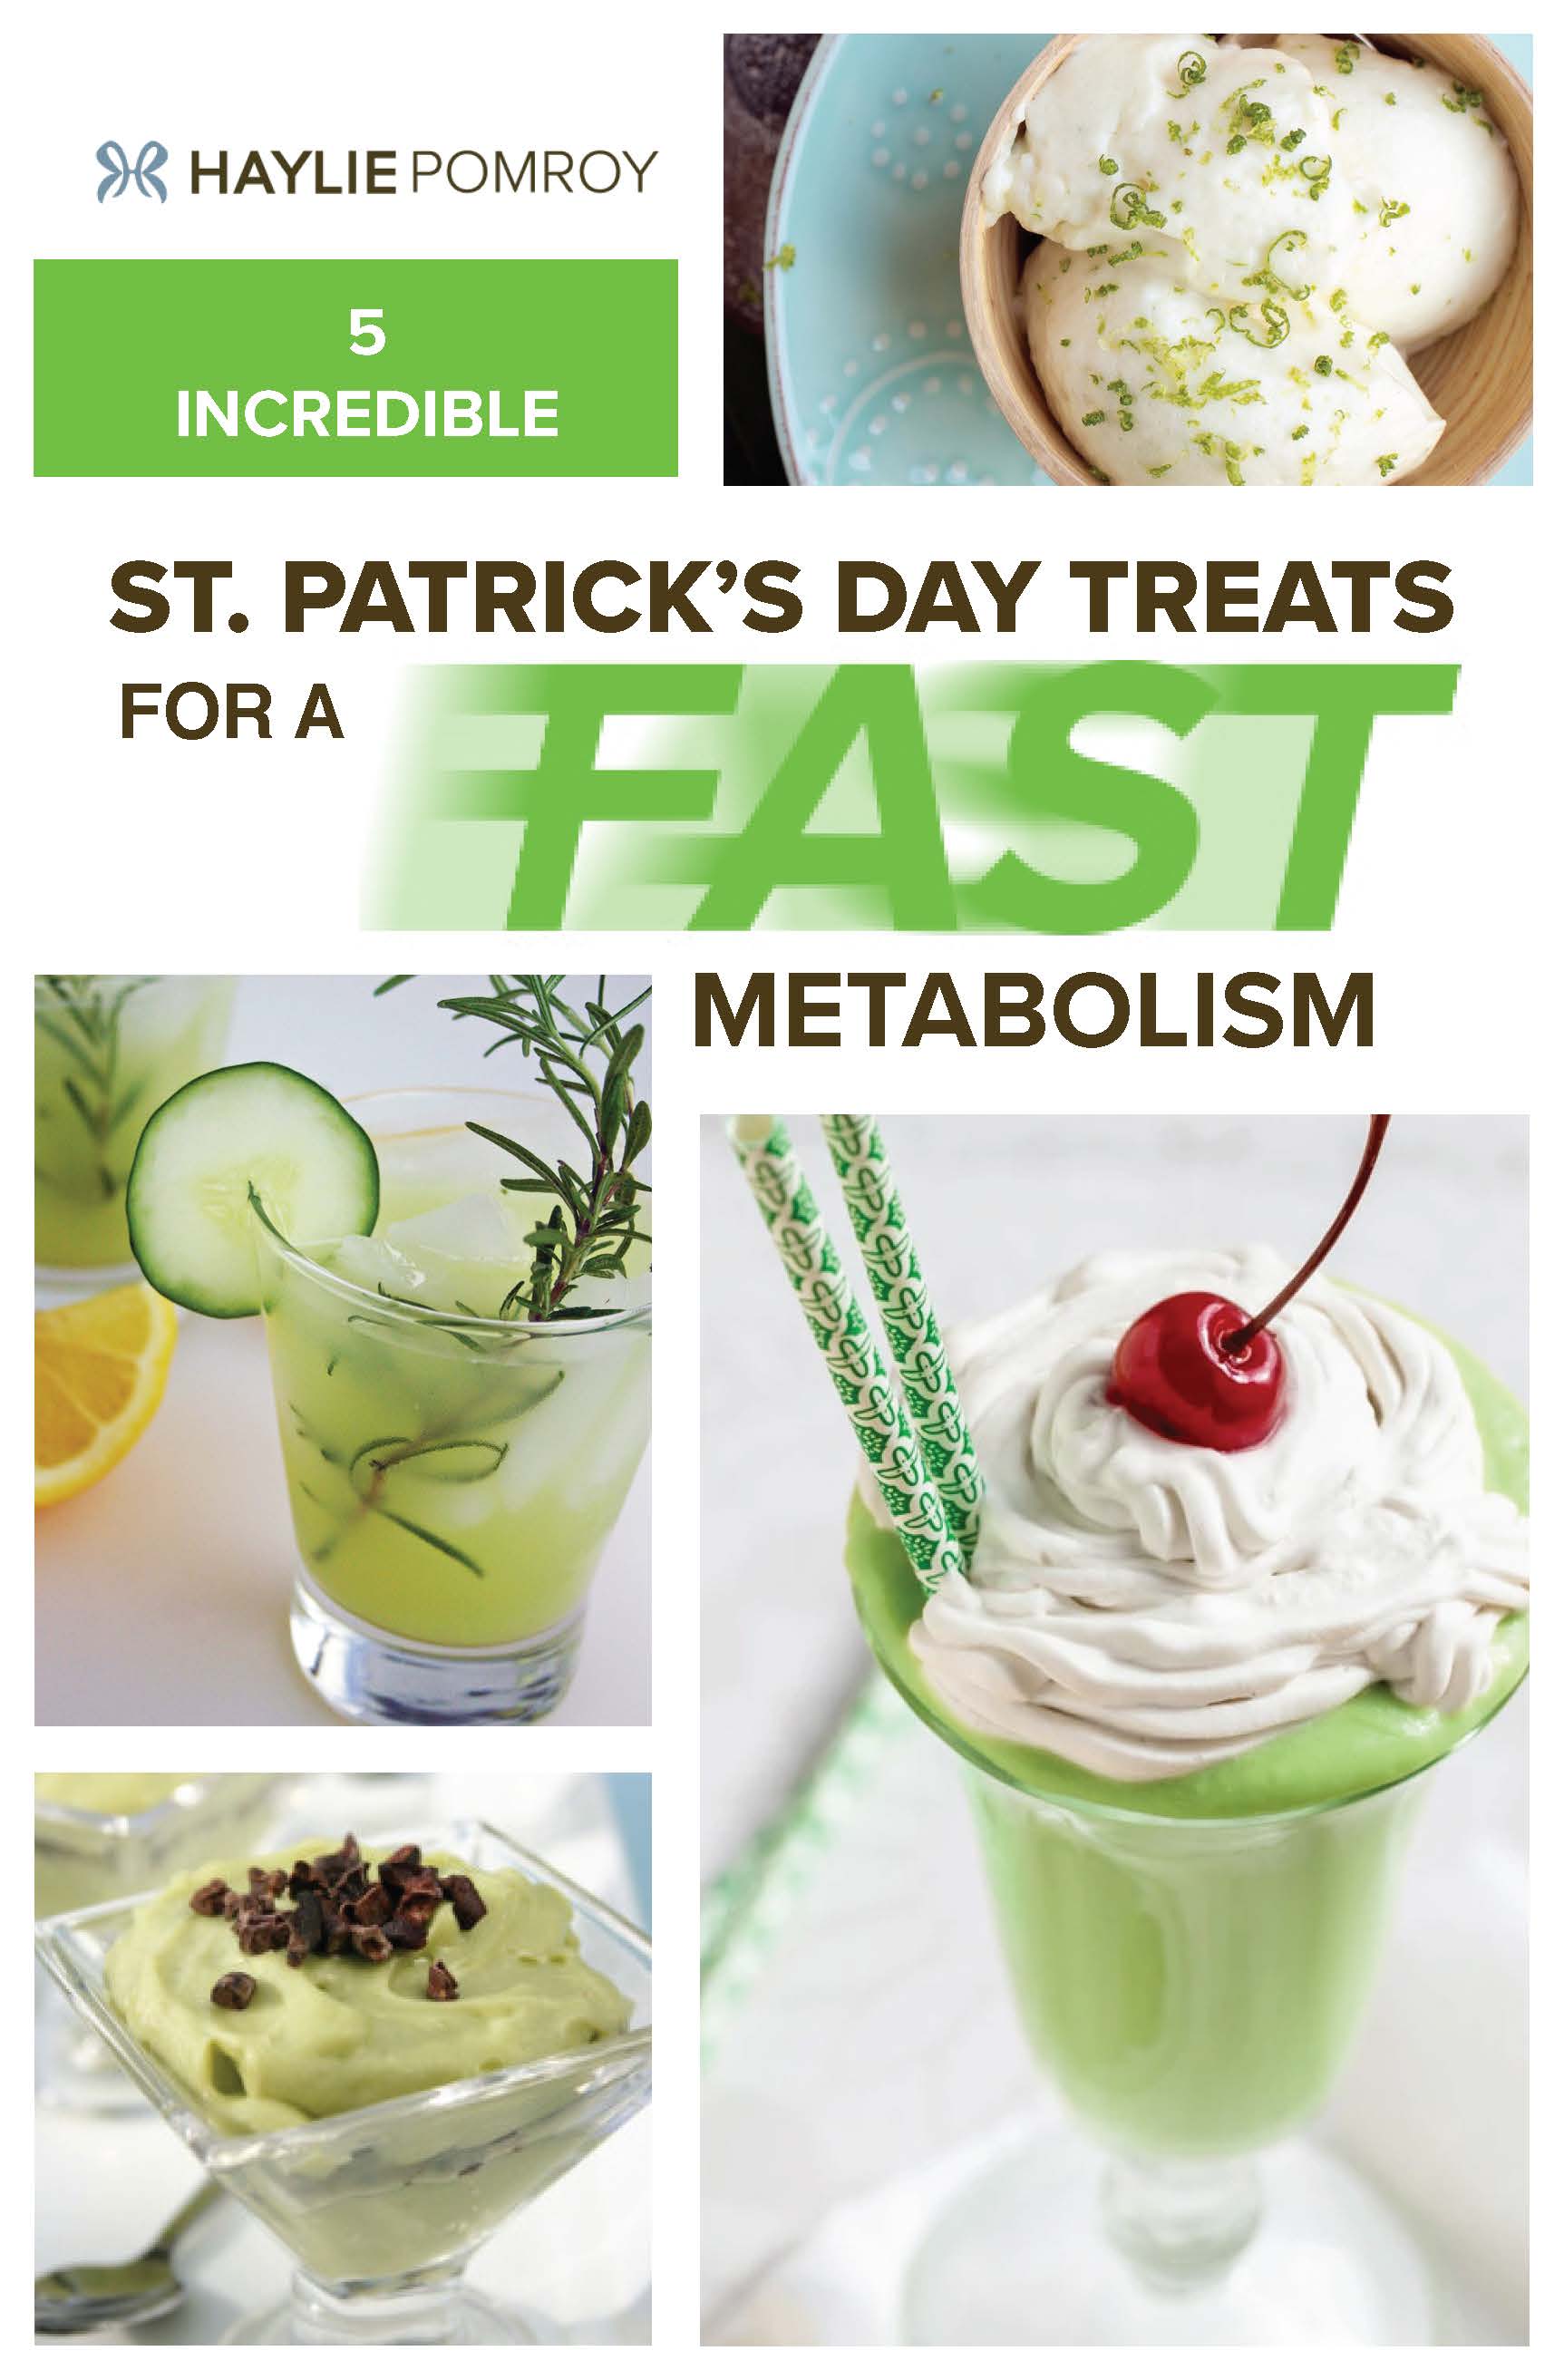 5 Incredible St. Patrick's Day Recipes for a Fast Metabolism